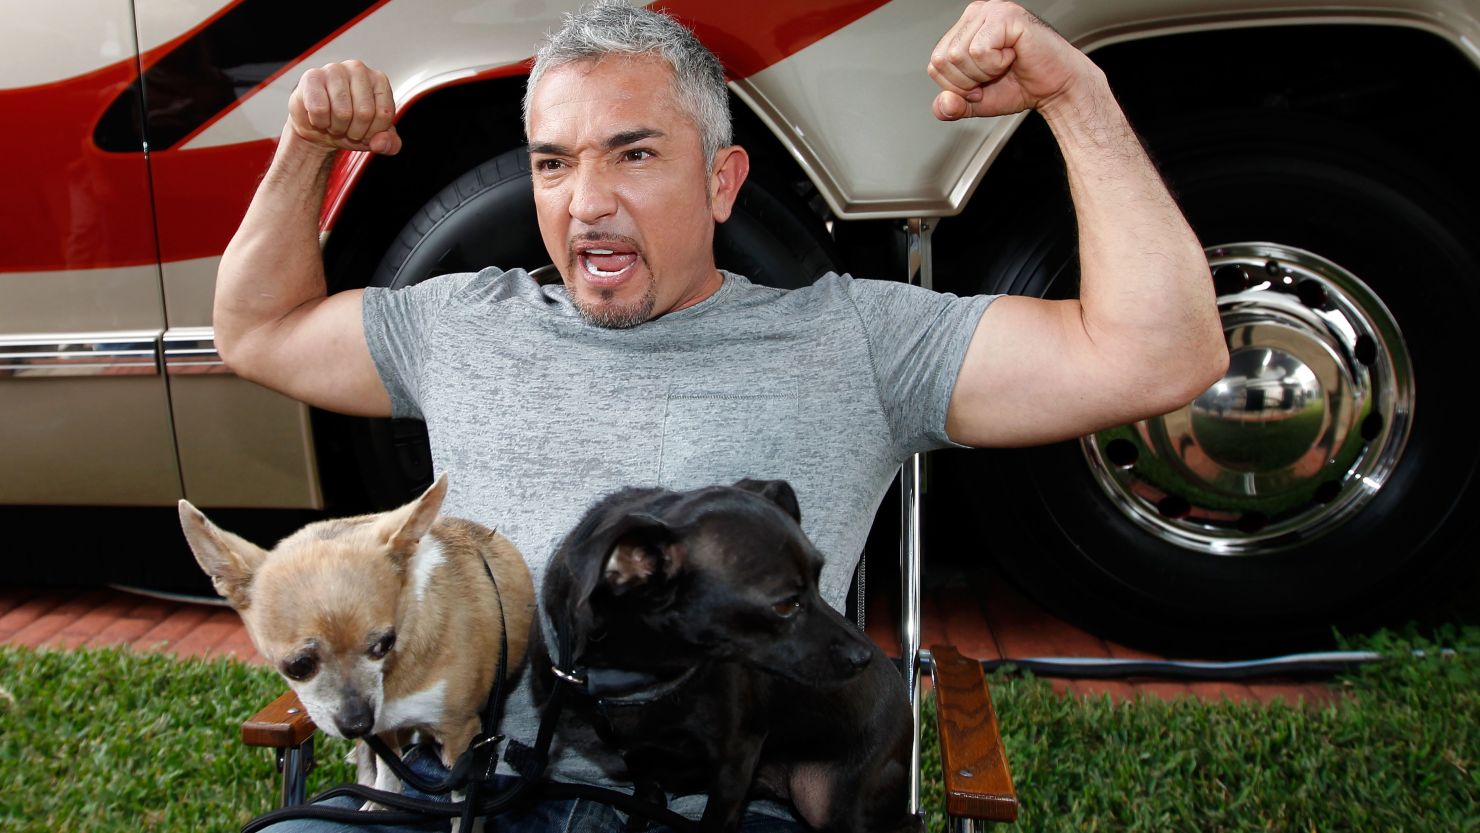 Cesar Millan: "We will continue to rescue and rehabilitate even the most difficult problem dogs."